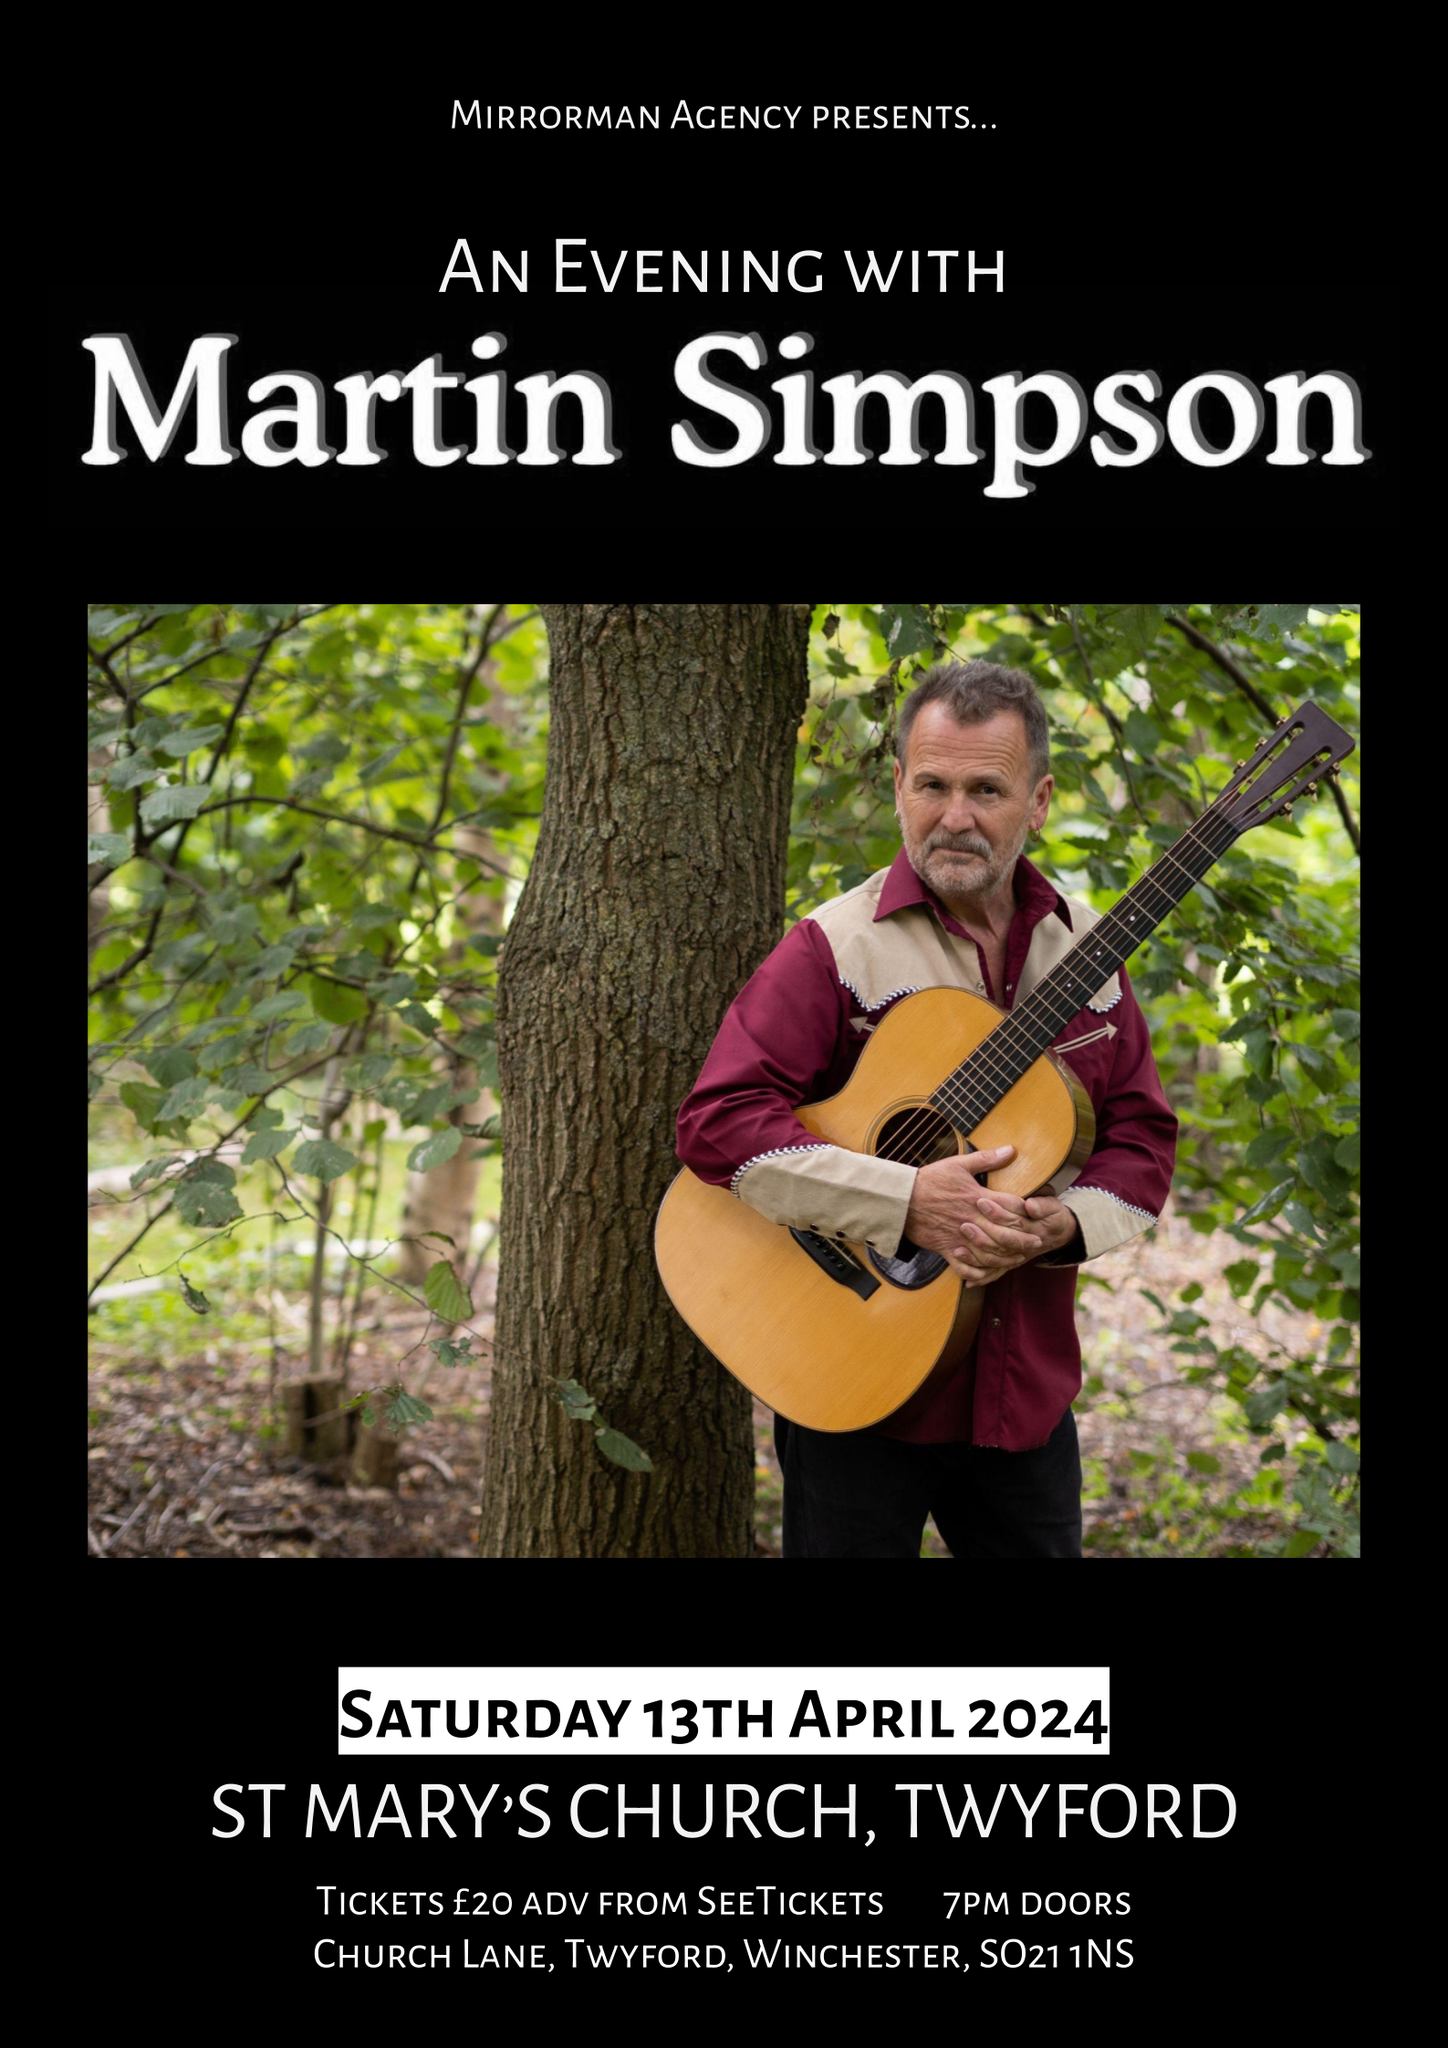 An evening with Martin Simpson